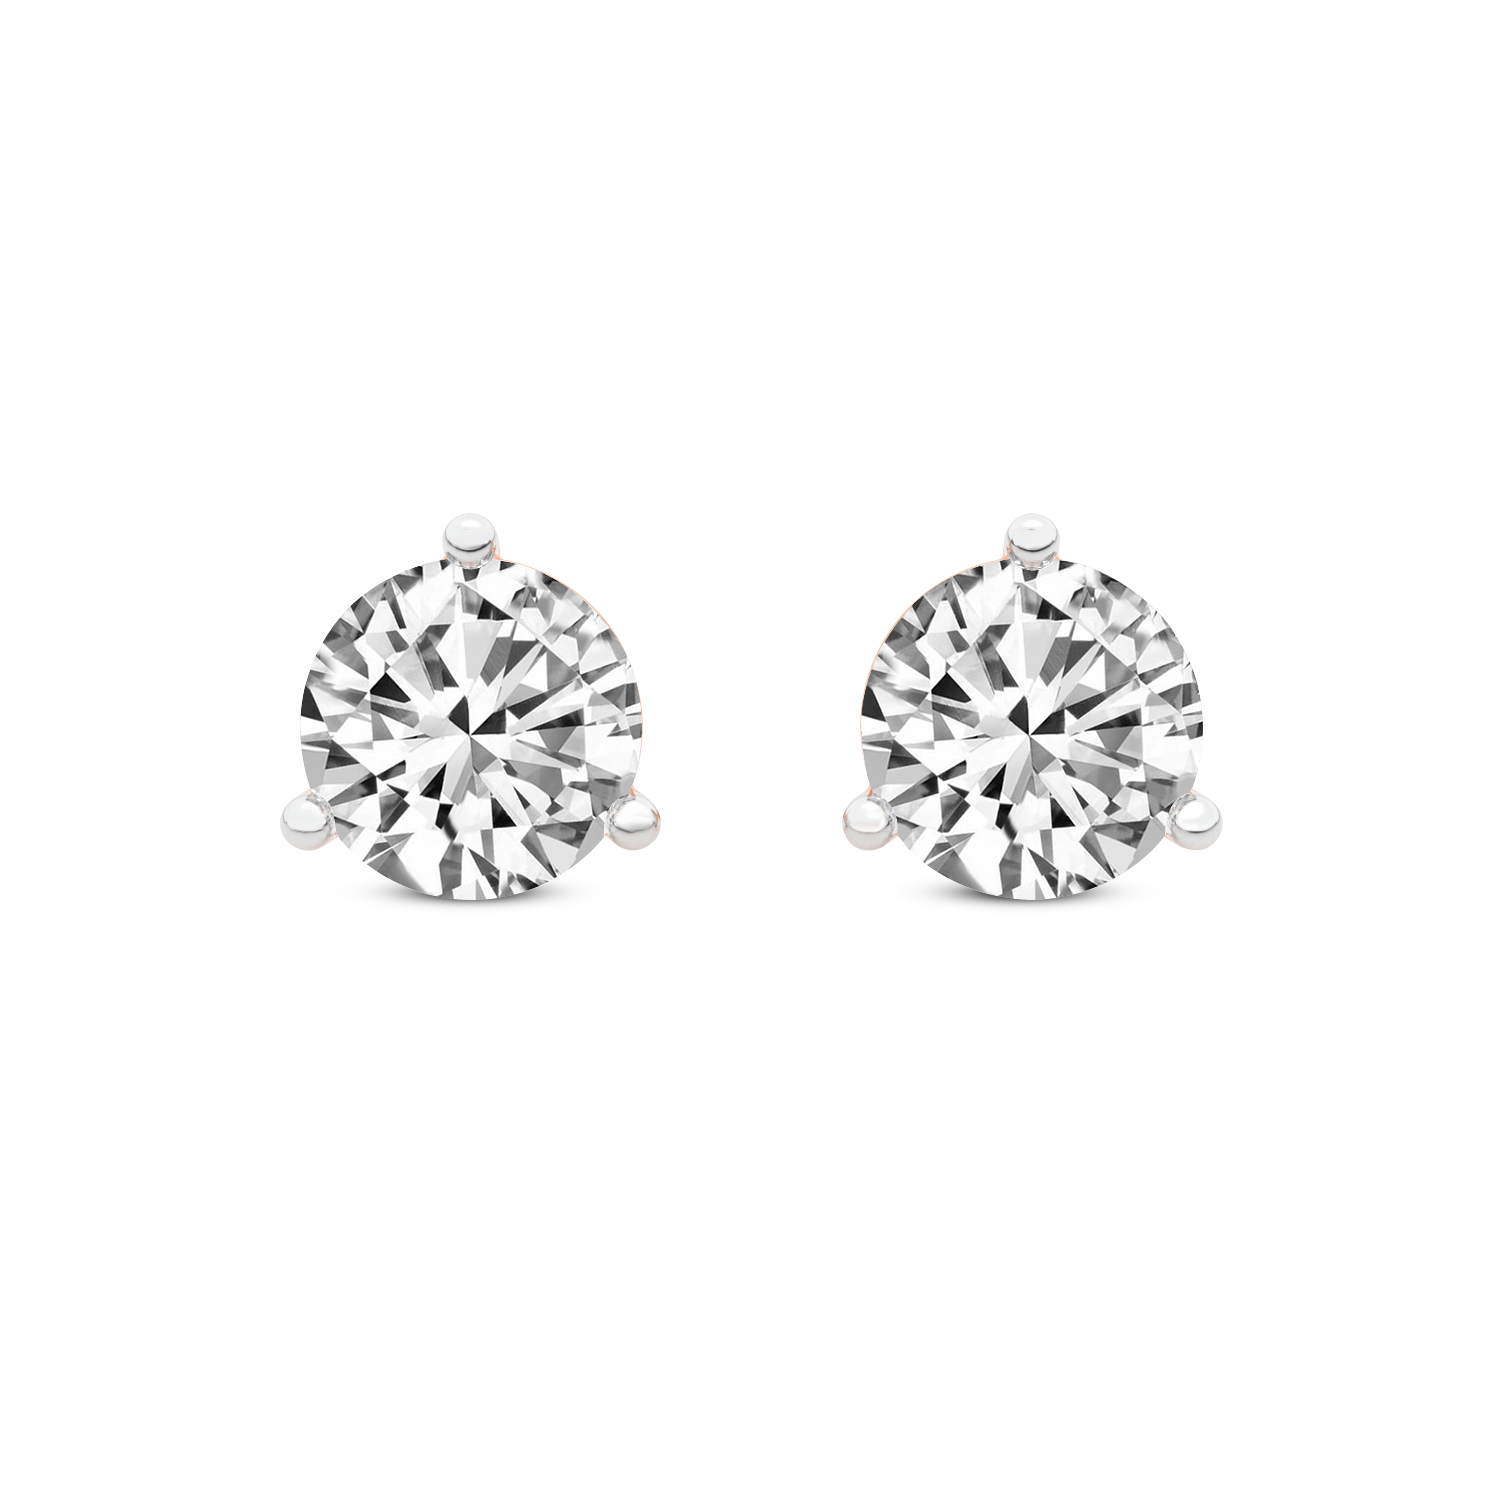 3 Prong Martini Round Lab Diamond Stud Earrings rose gold earring, small front view